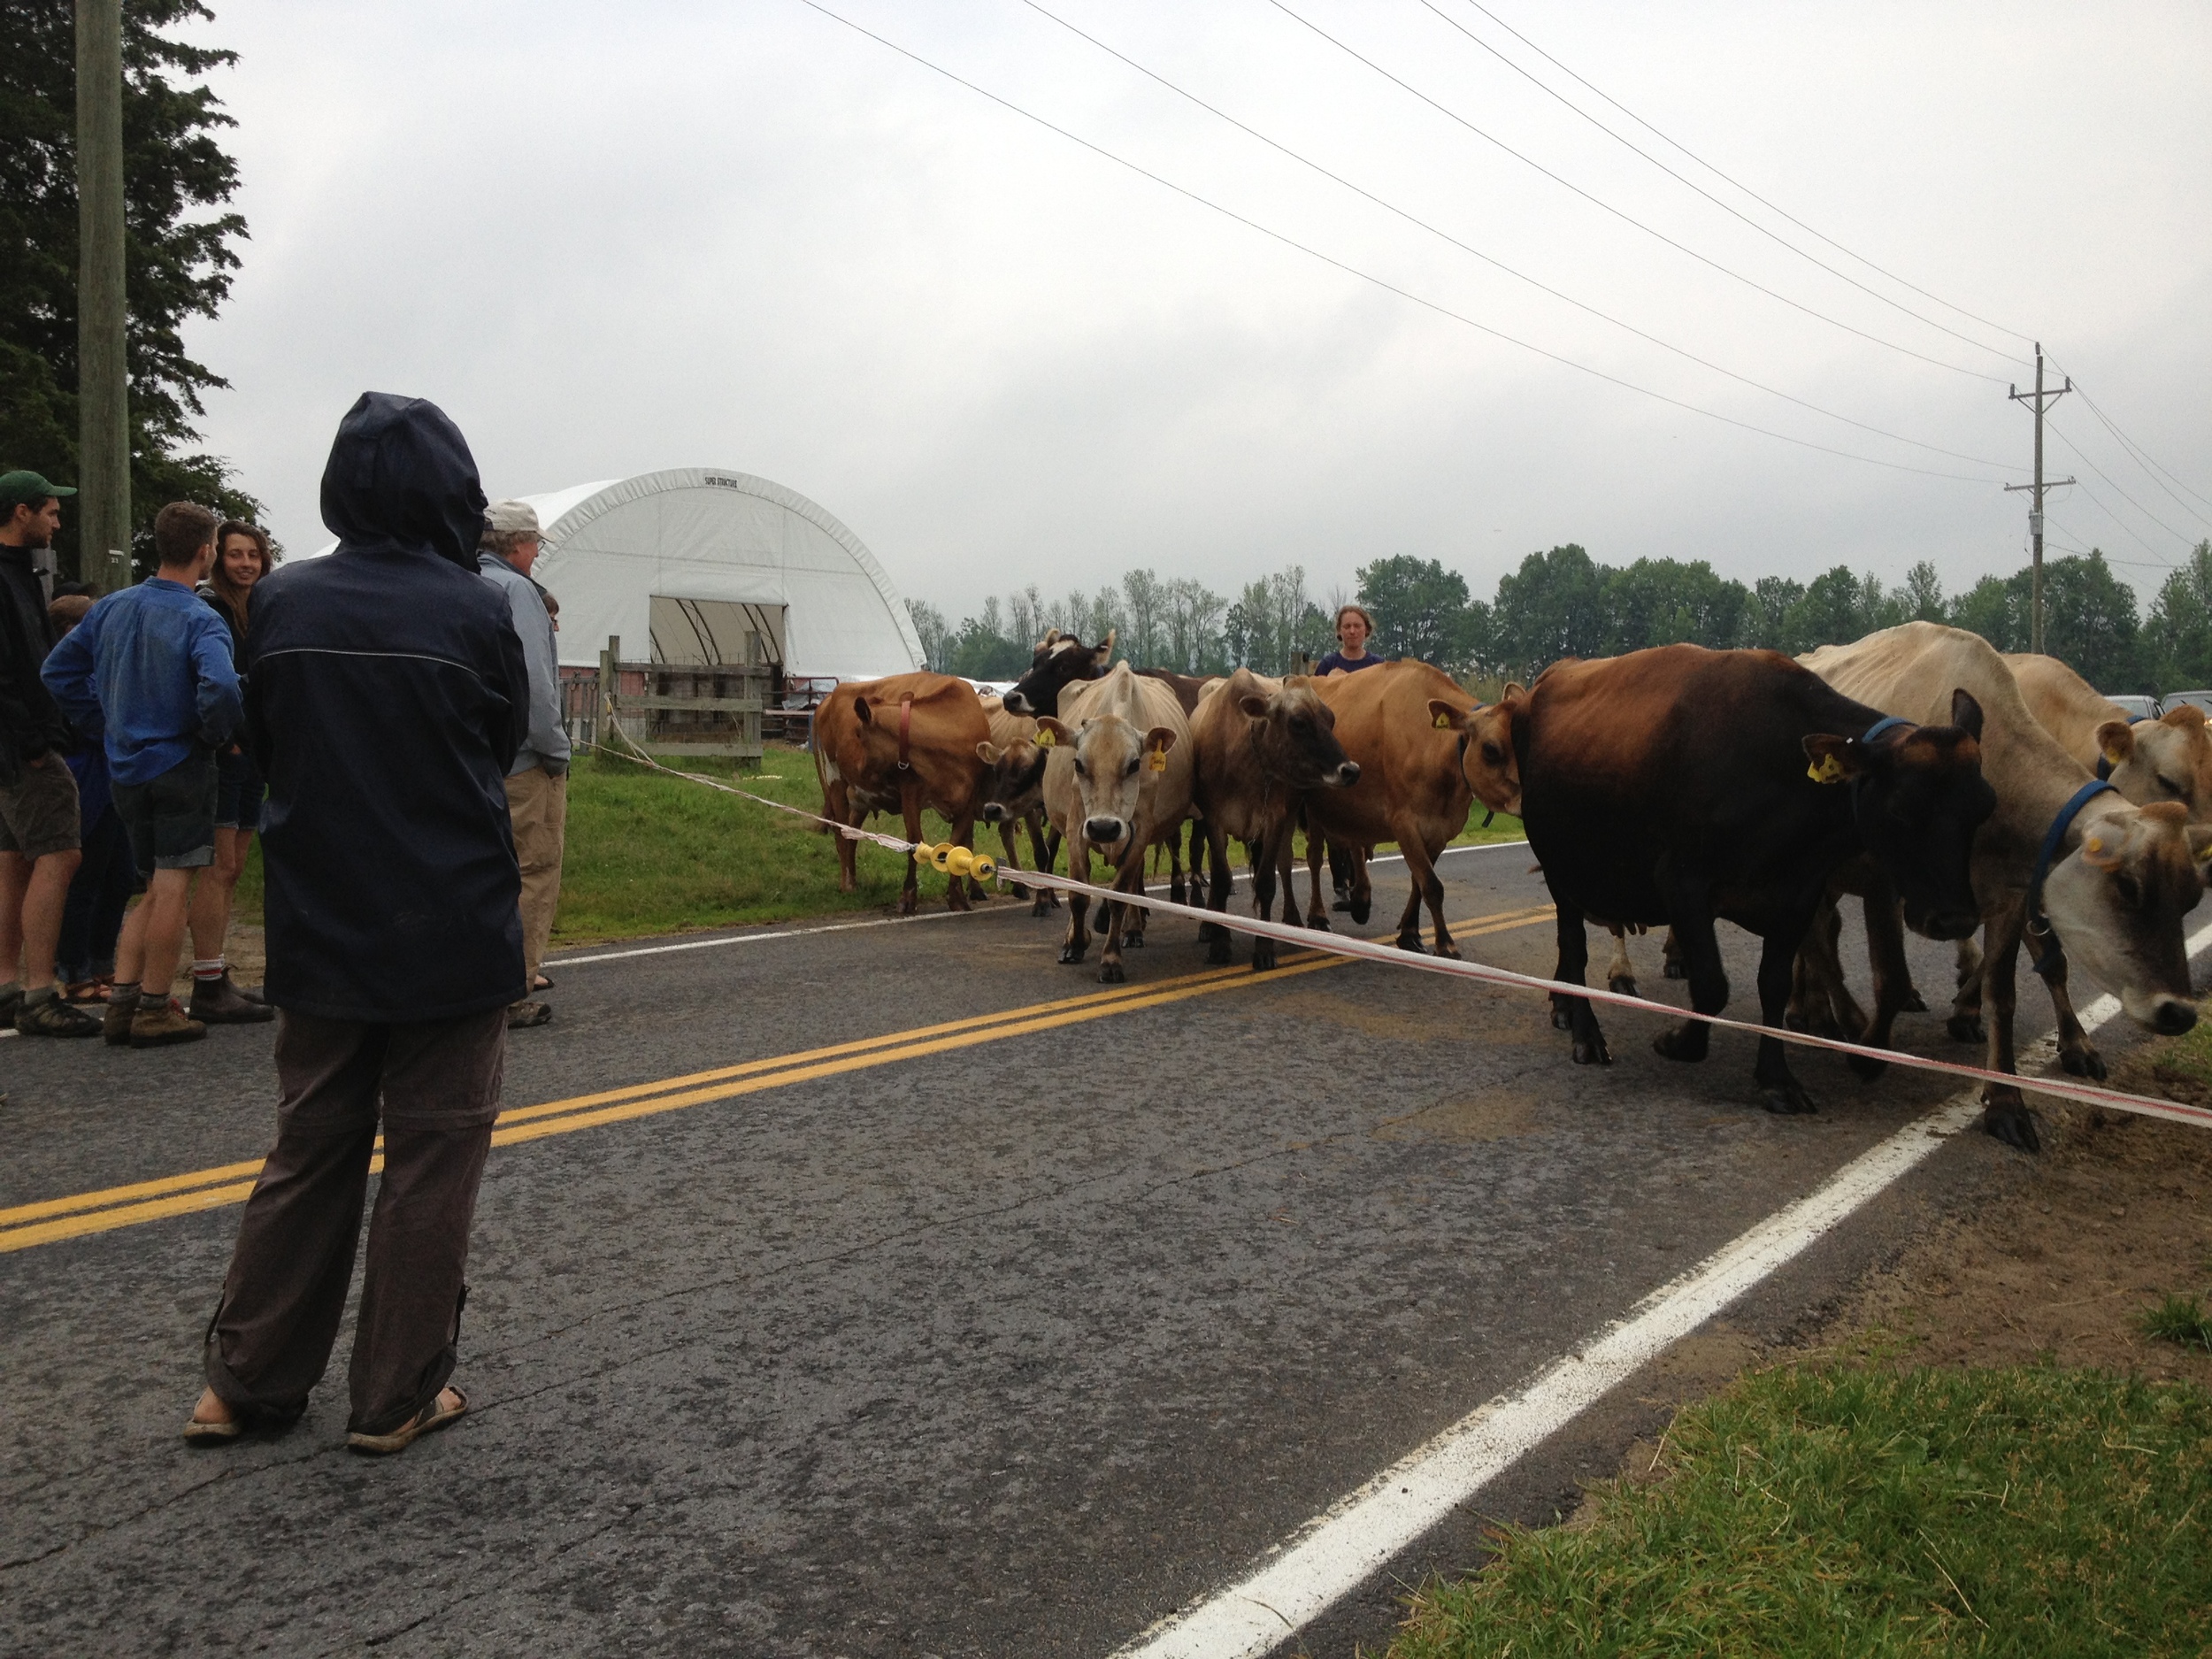  About a mile down the street is  North Country Creamery  at Clover Mead Farm, also in its first year of production. Twice a day, twelve Jerseys hold up traffic as they come out of the pasture to be milked.  